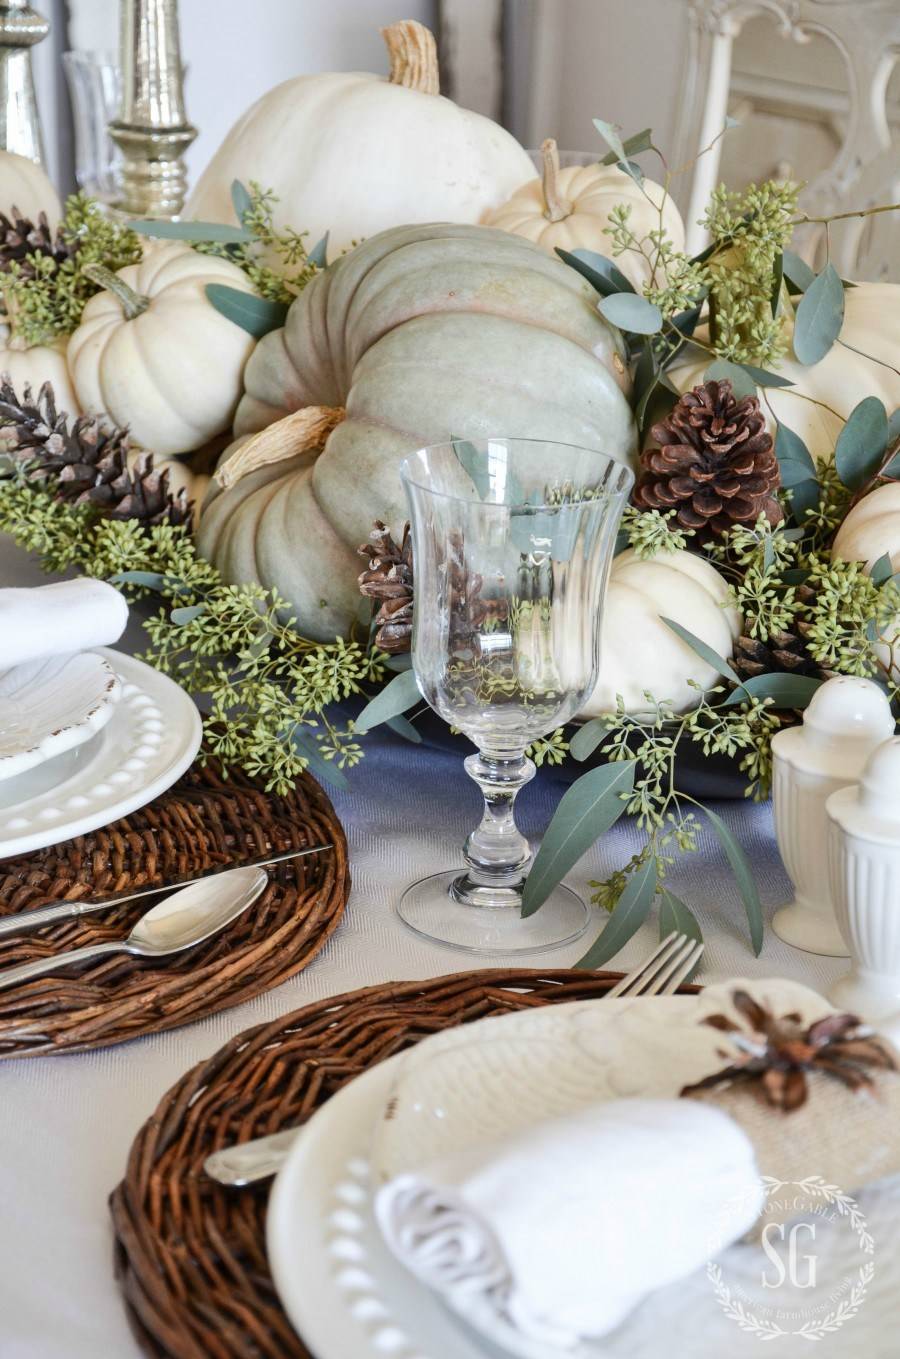 Roundup: 10 Unique Thanksgiving Tablescapes To Inspire You